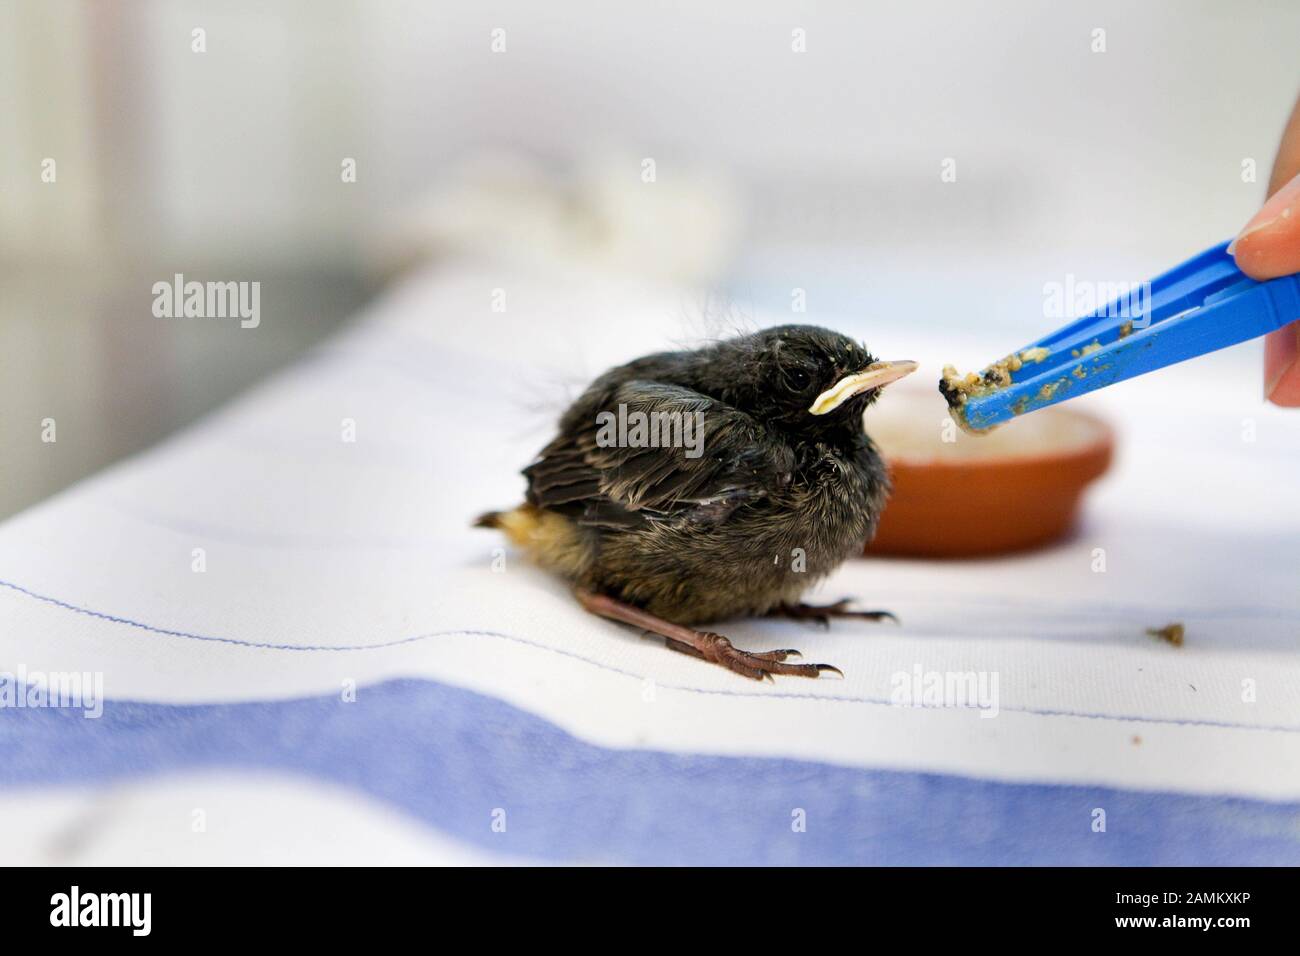 2-3 weeks old redstart, taken at the open day in the clinic for birds, reptiles, amphibians and ornamental fish of the Ludwig-Maximilians-University (LMU) Munich in Oberschleißheim. [automated translation] Stock Photo